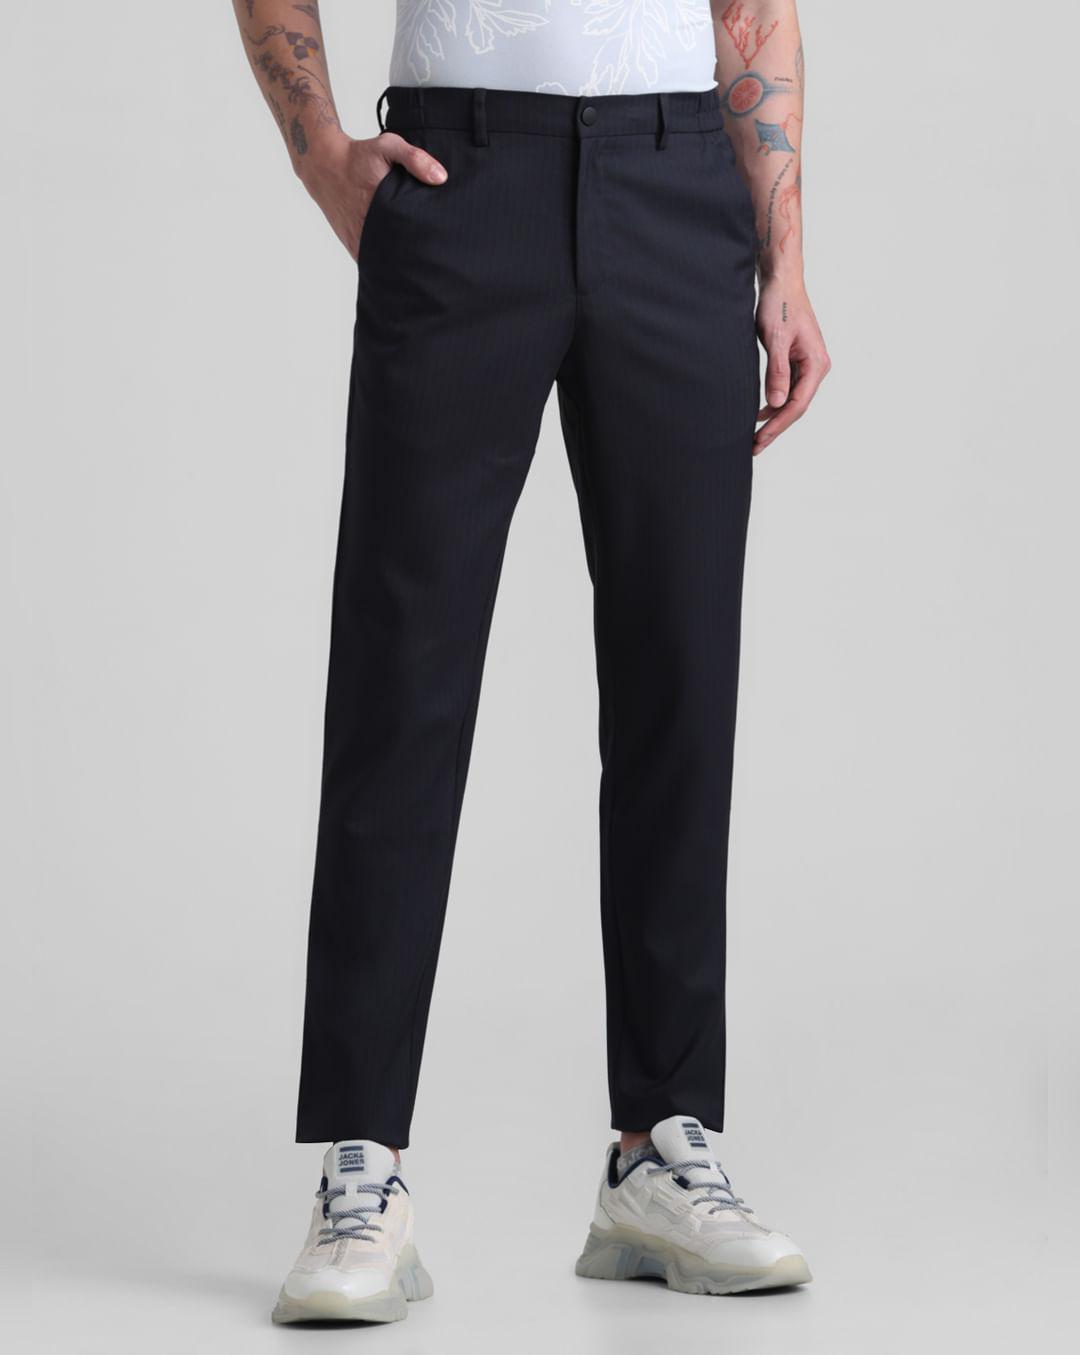 navy blue mid rise printed trousers